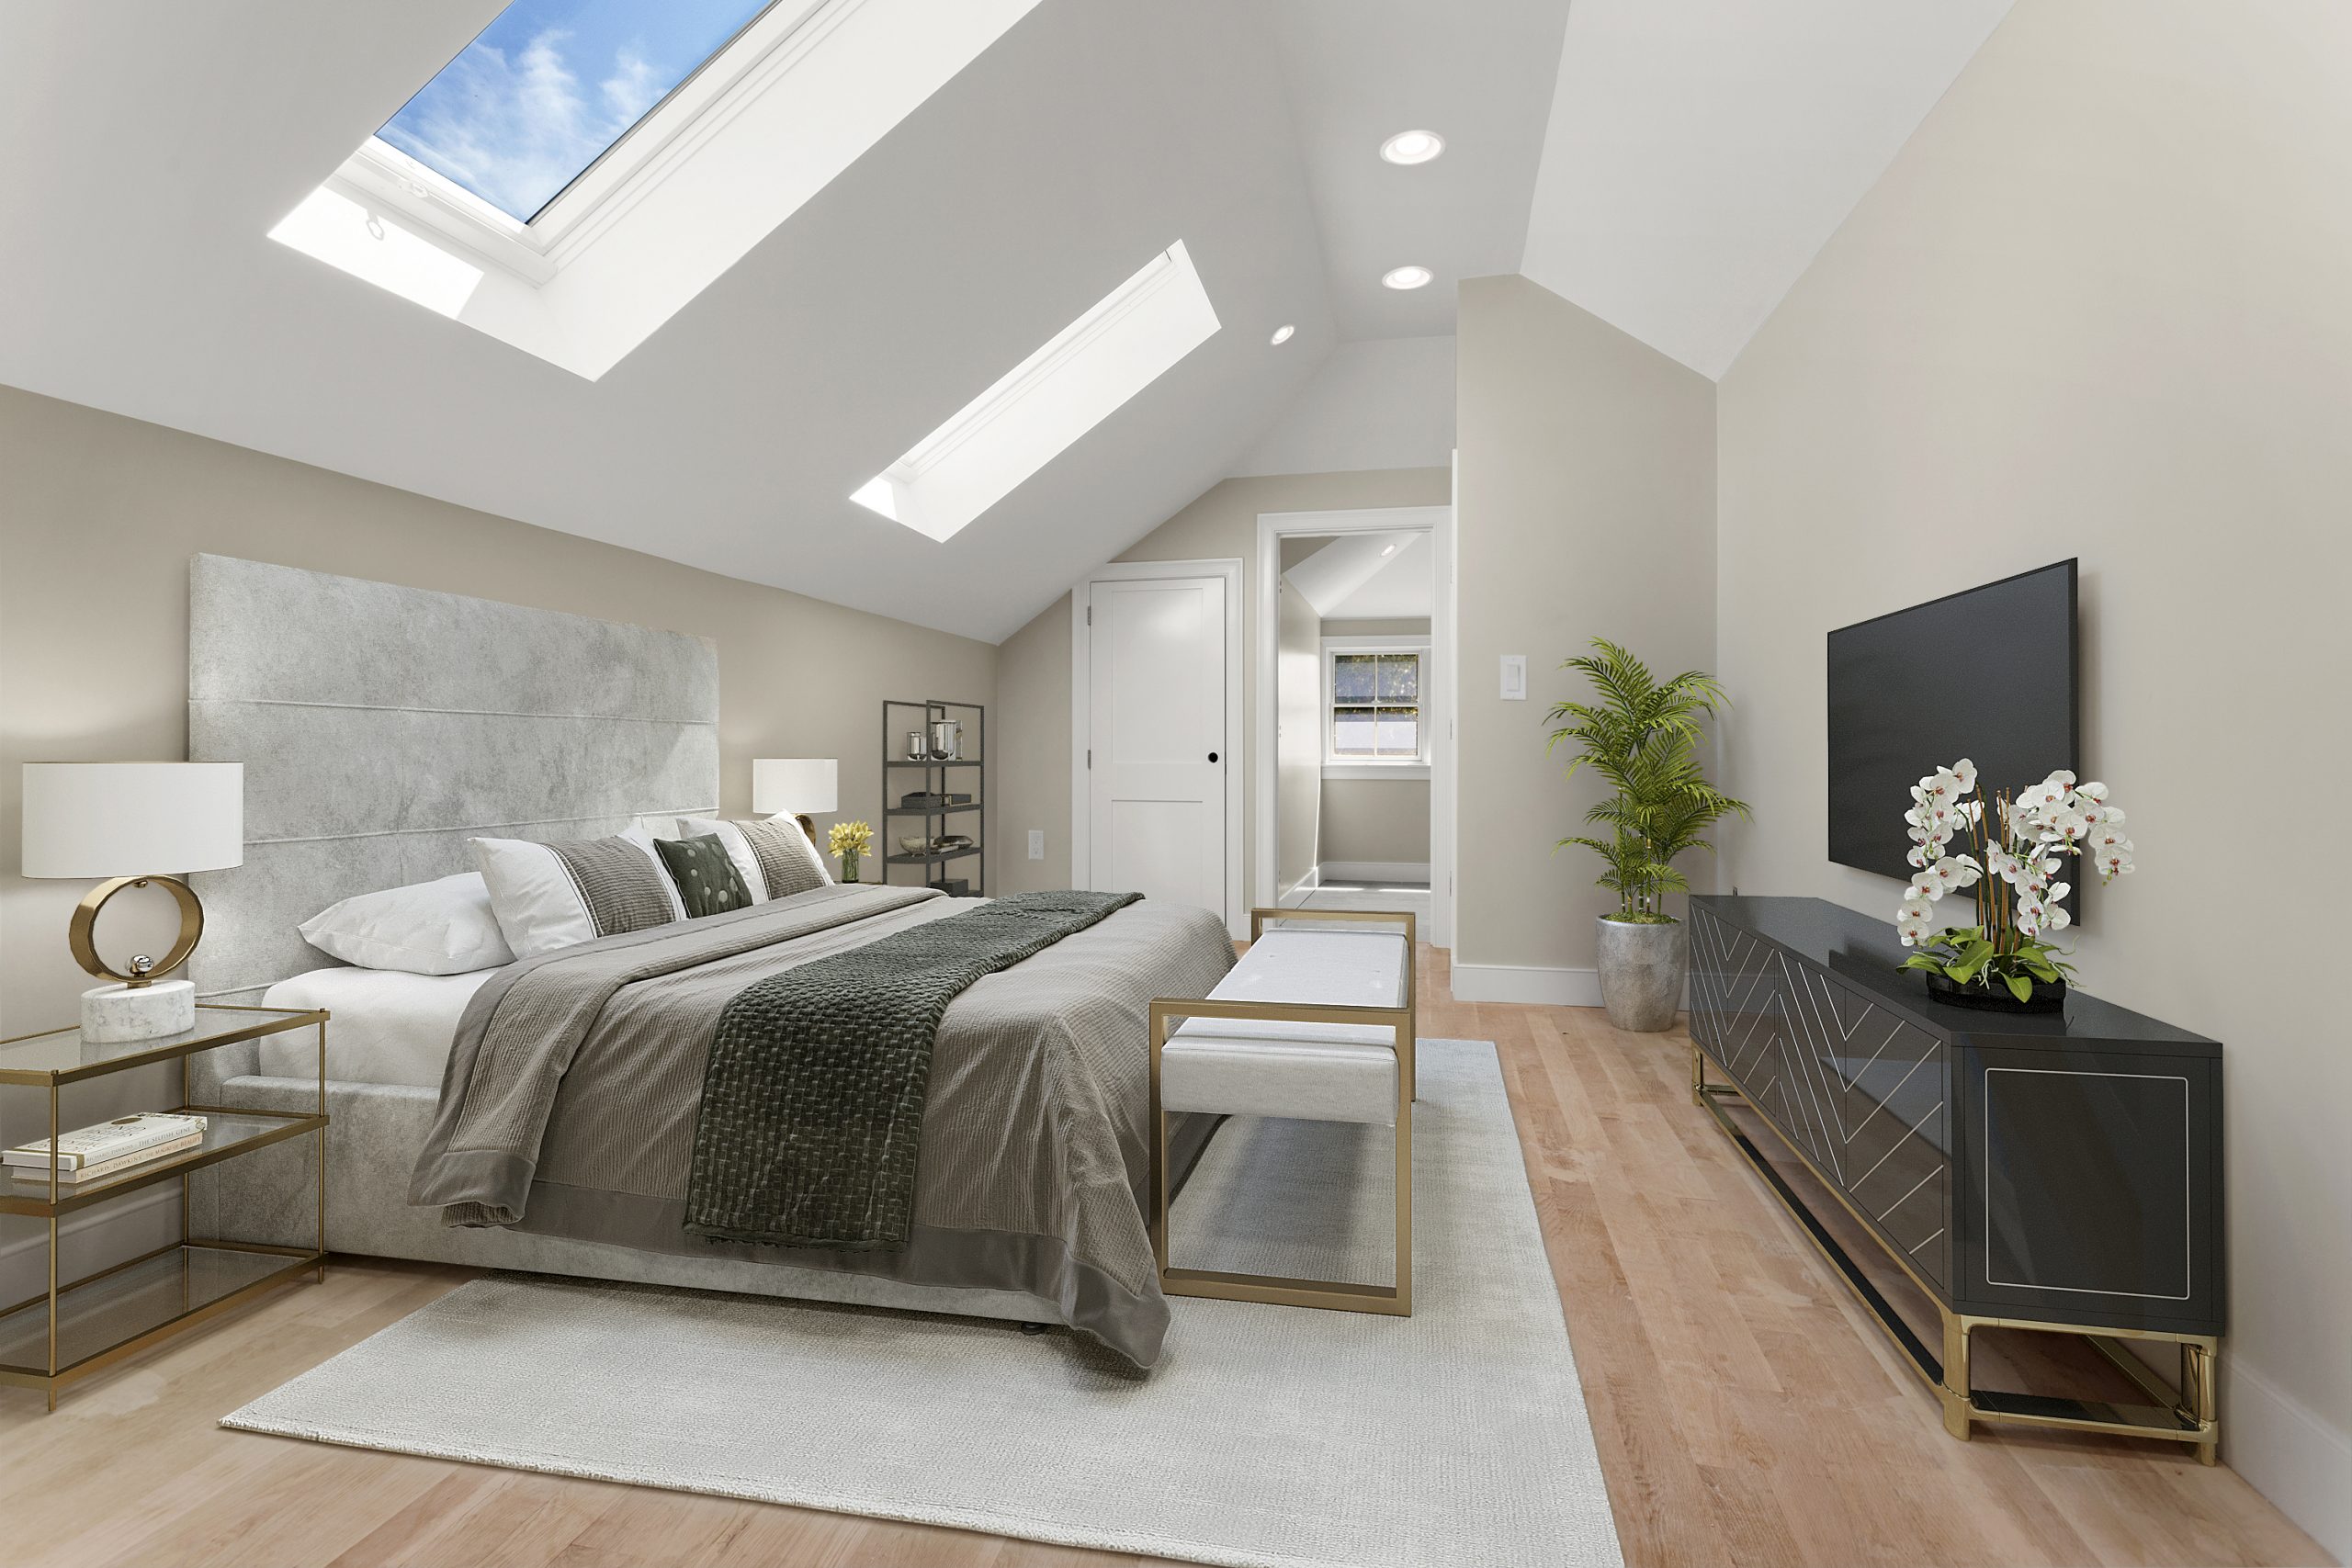 Example of Virtual Staging for Real Estate